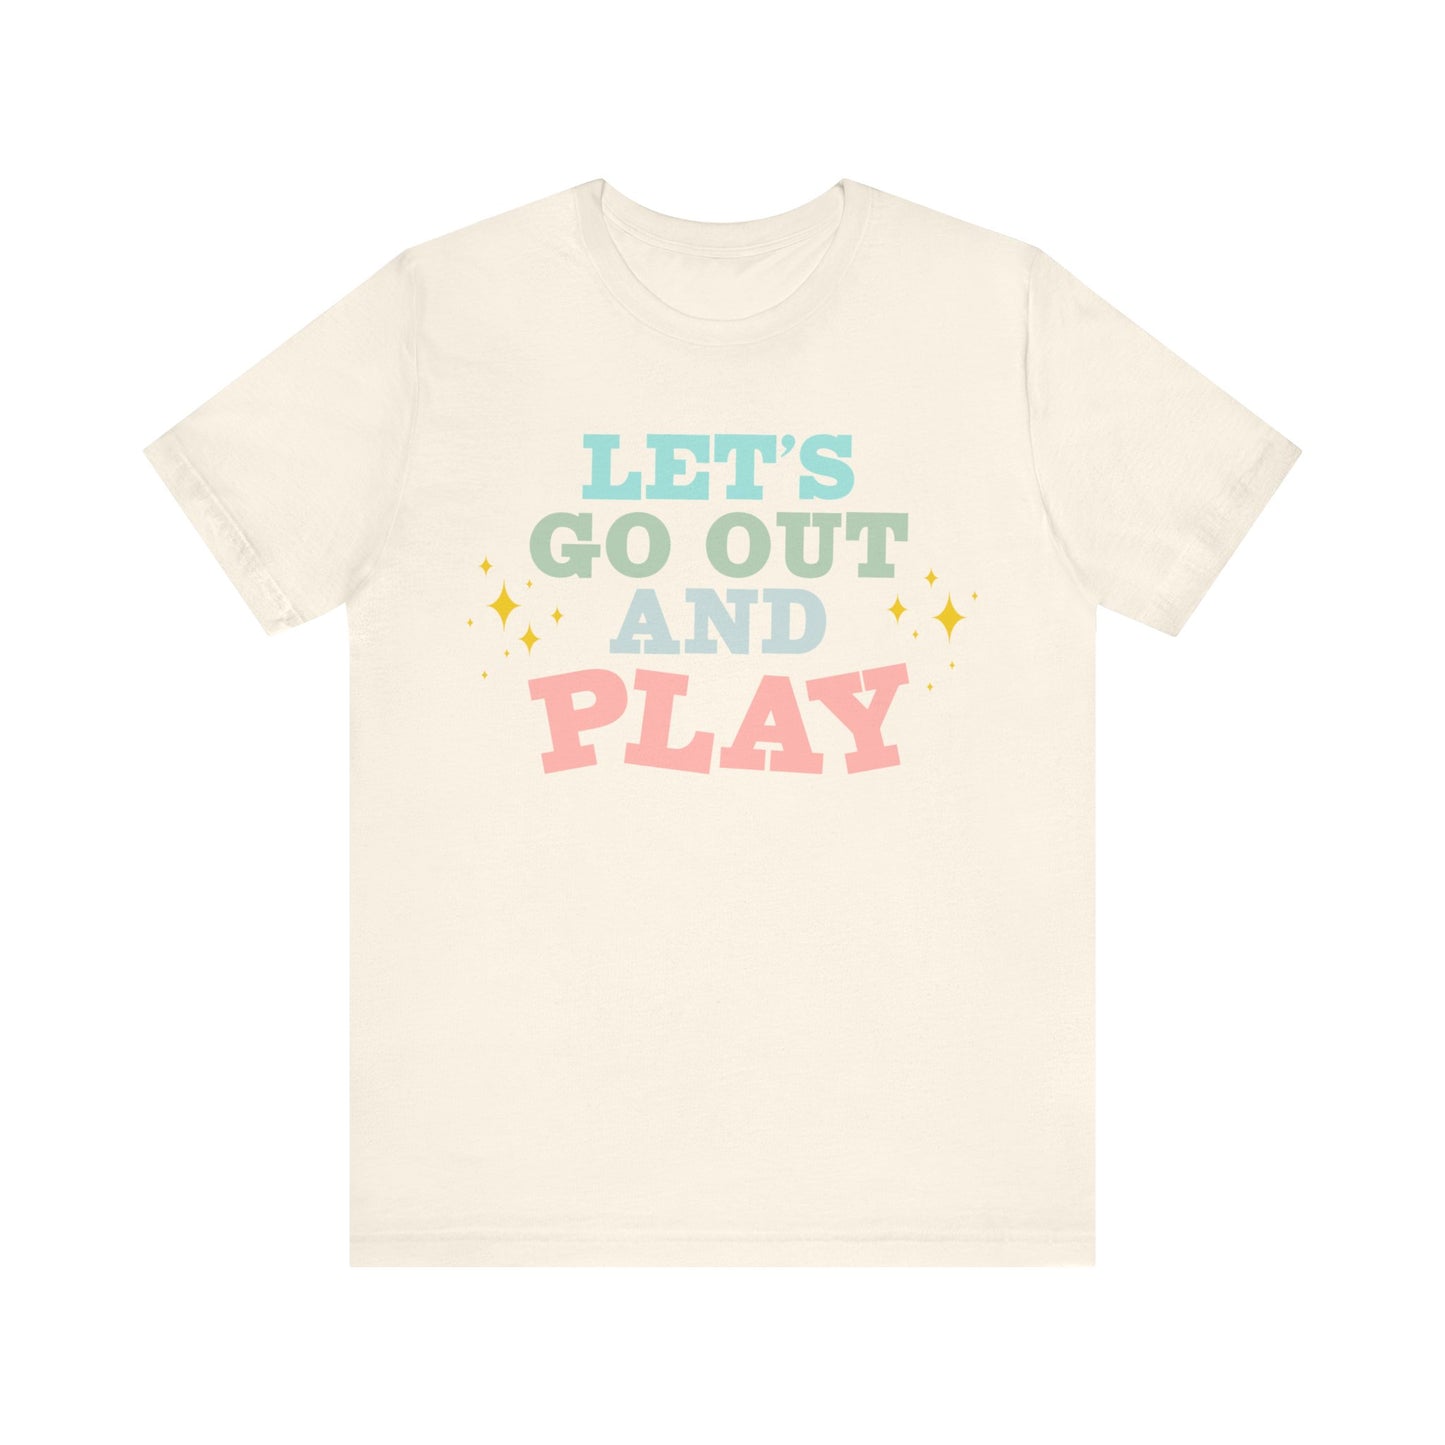 Let's Go Out And Play Shirt, Occupational Therapy Shirt, Therapist Shirt